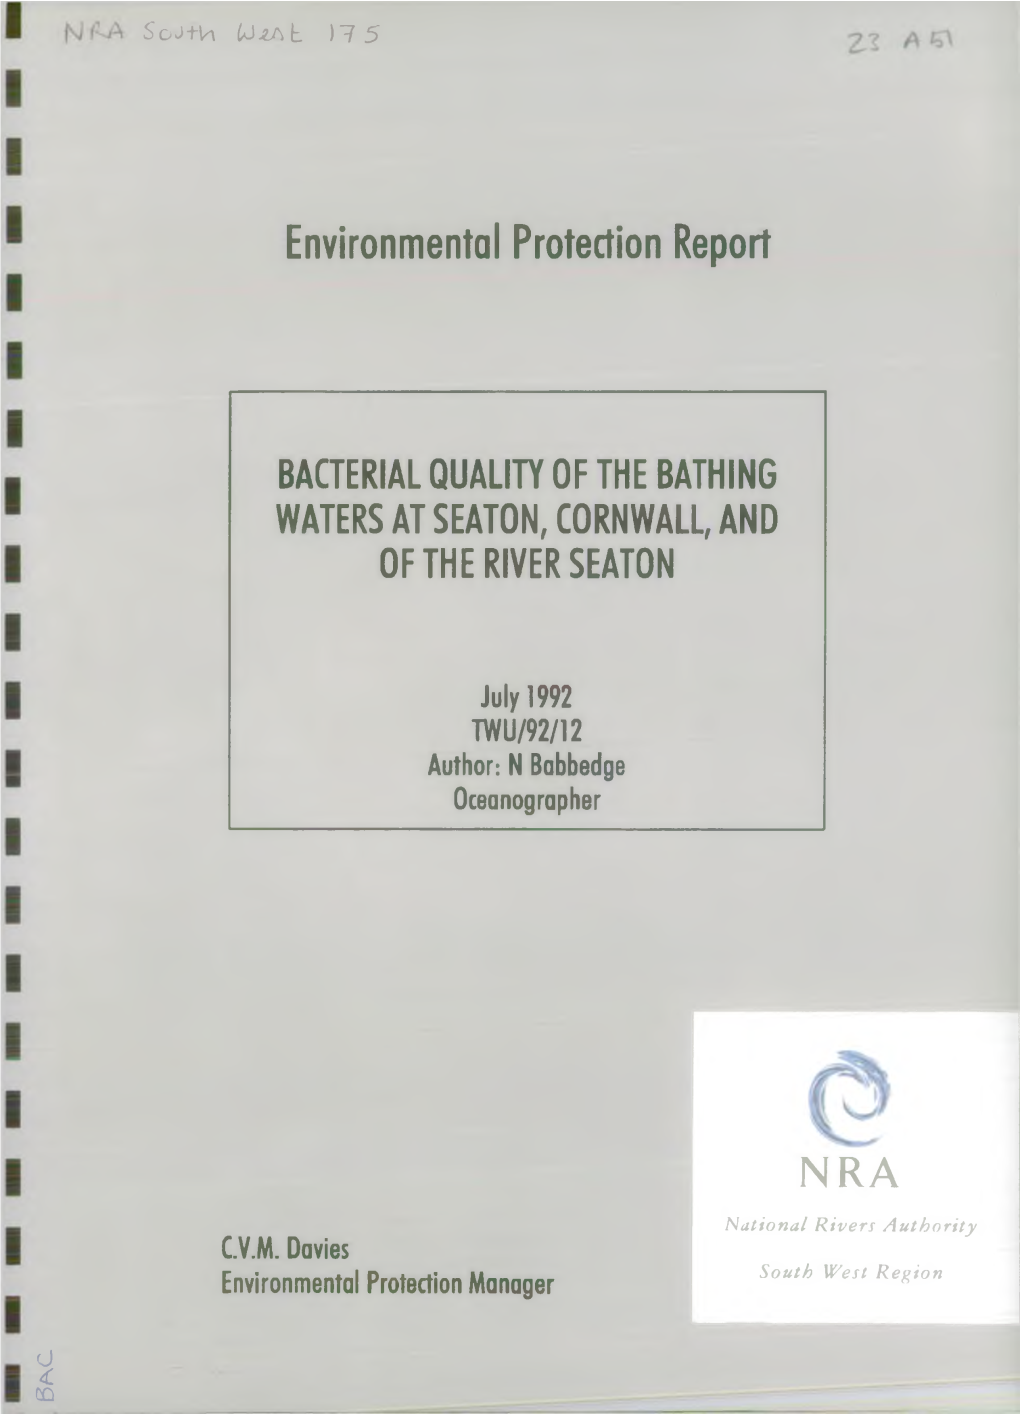 Bacterial Quality of the Bathing Waters at Seaton